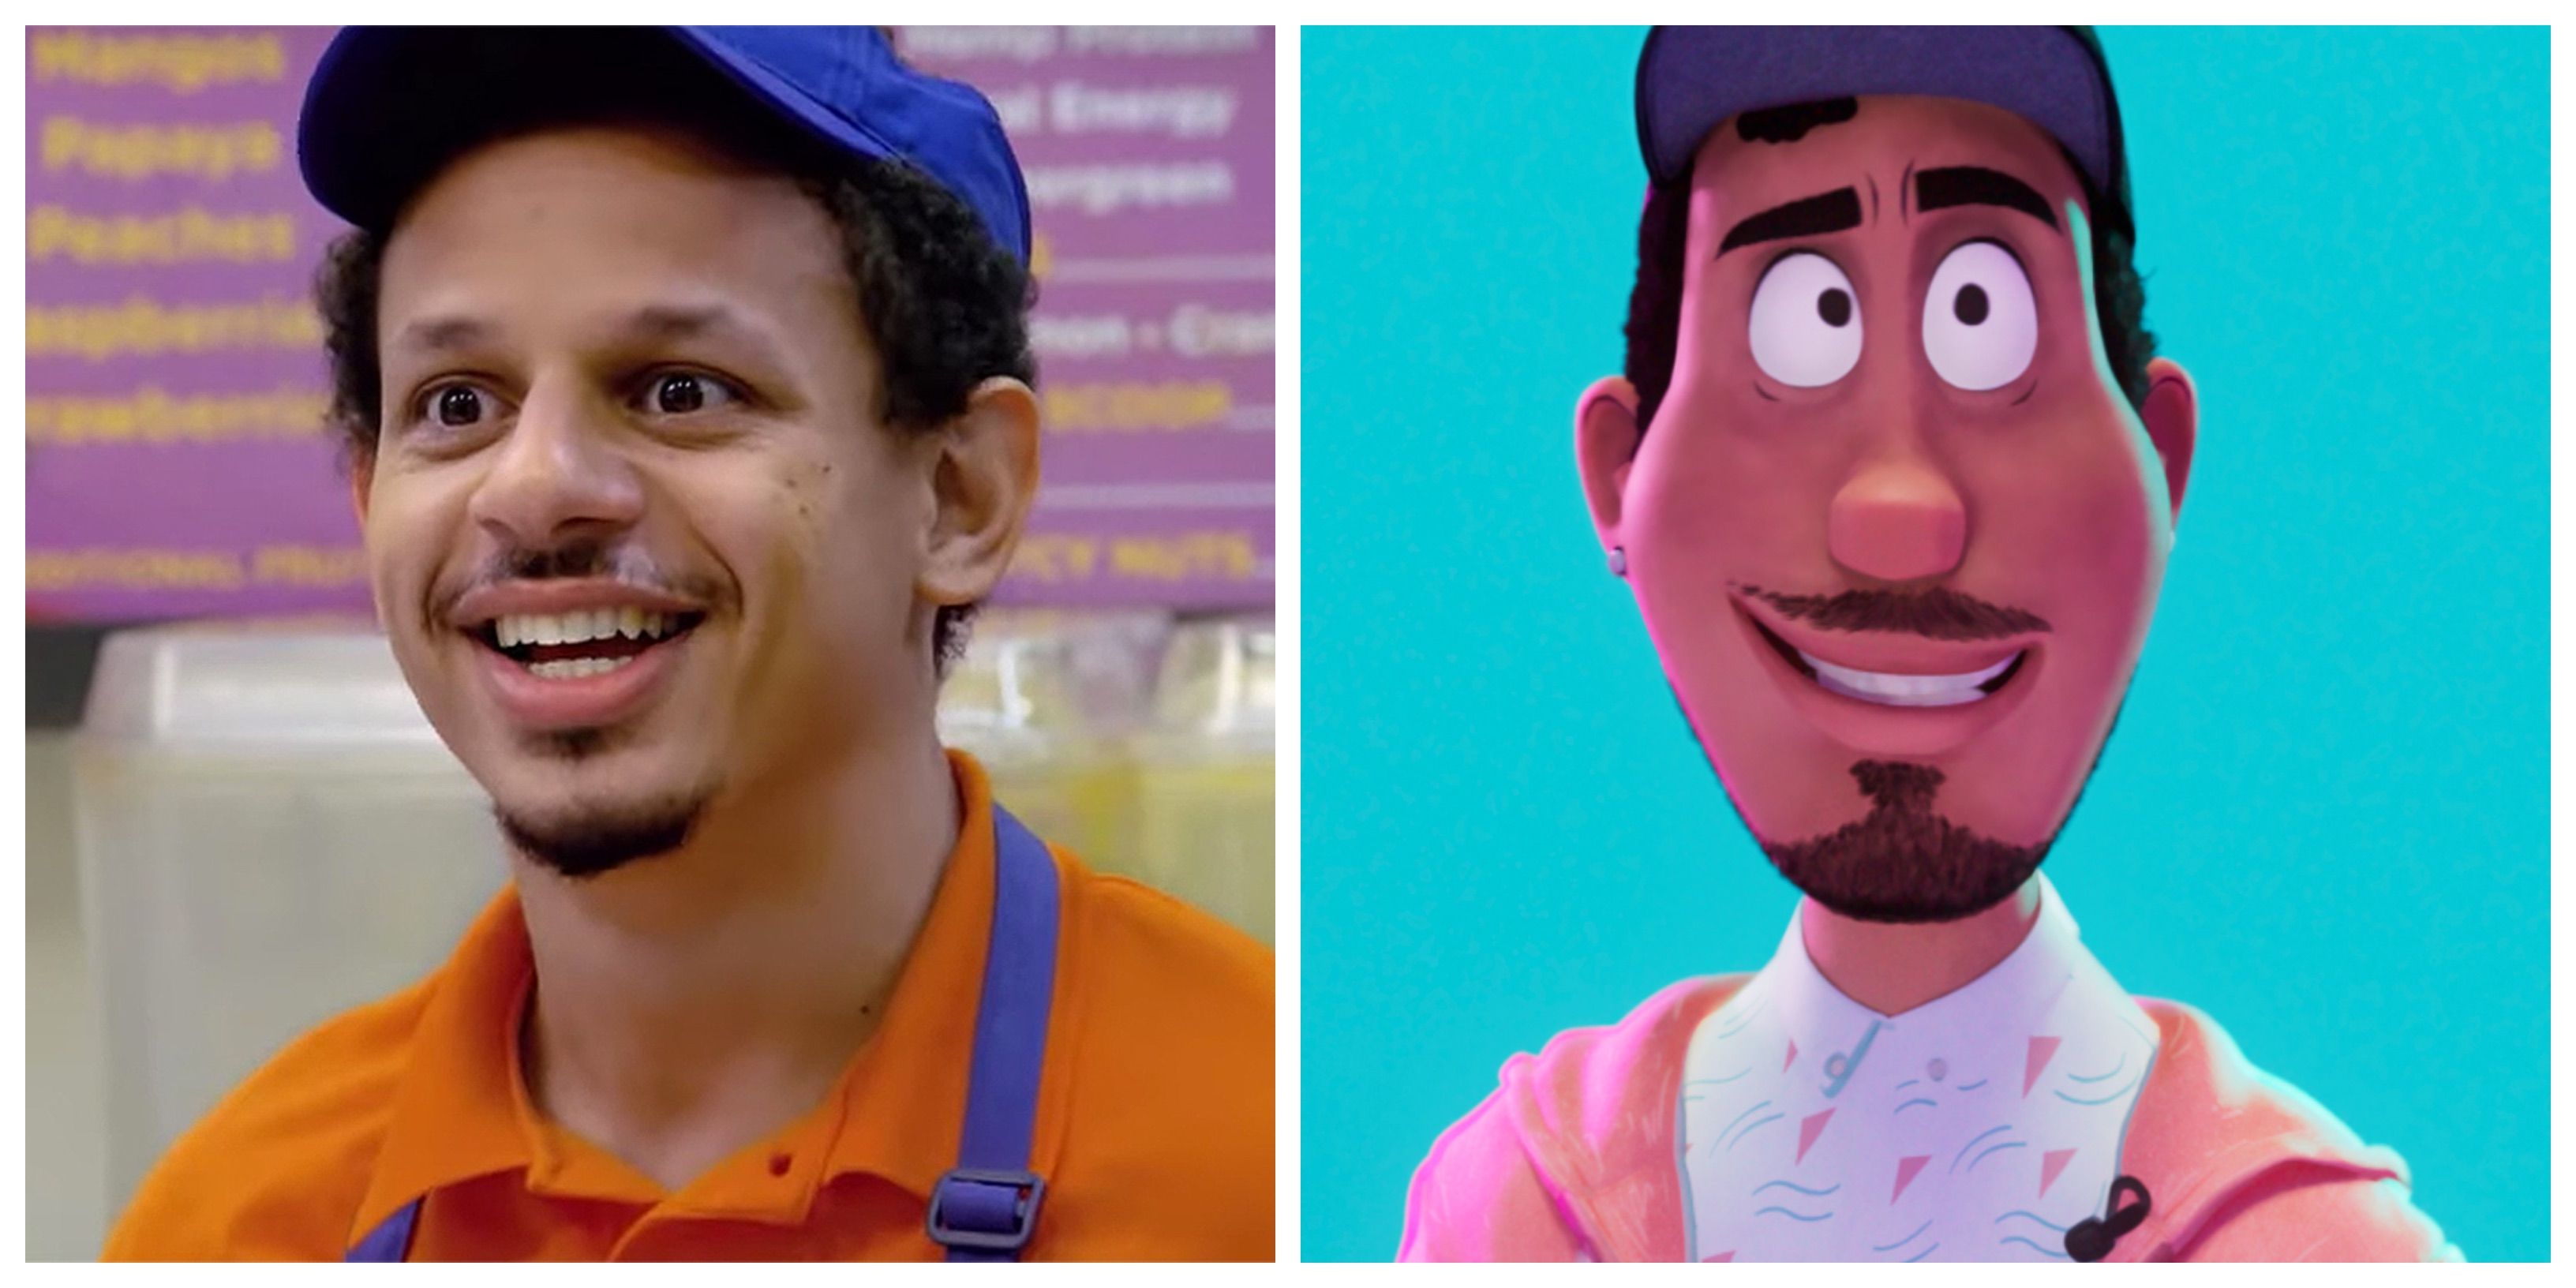 Eric Andre as Dr. Mark Bowman in The Mitchells vs. the Machines on Netflix